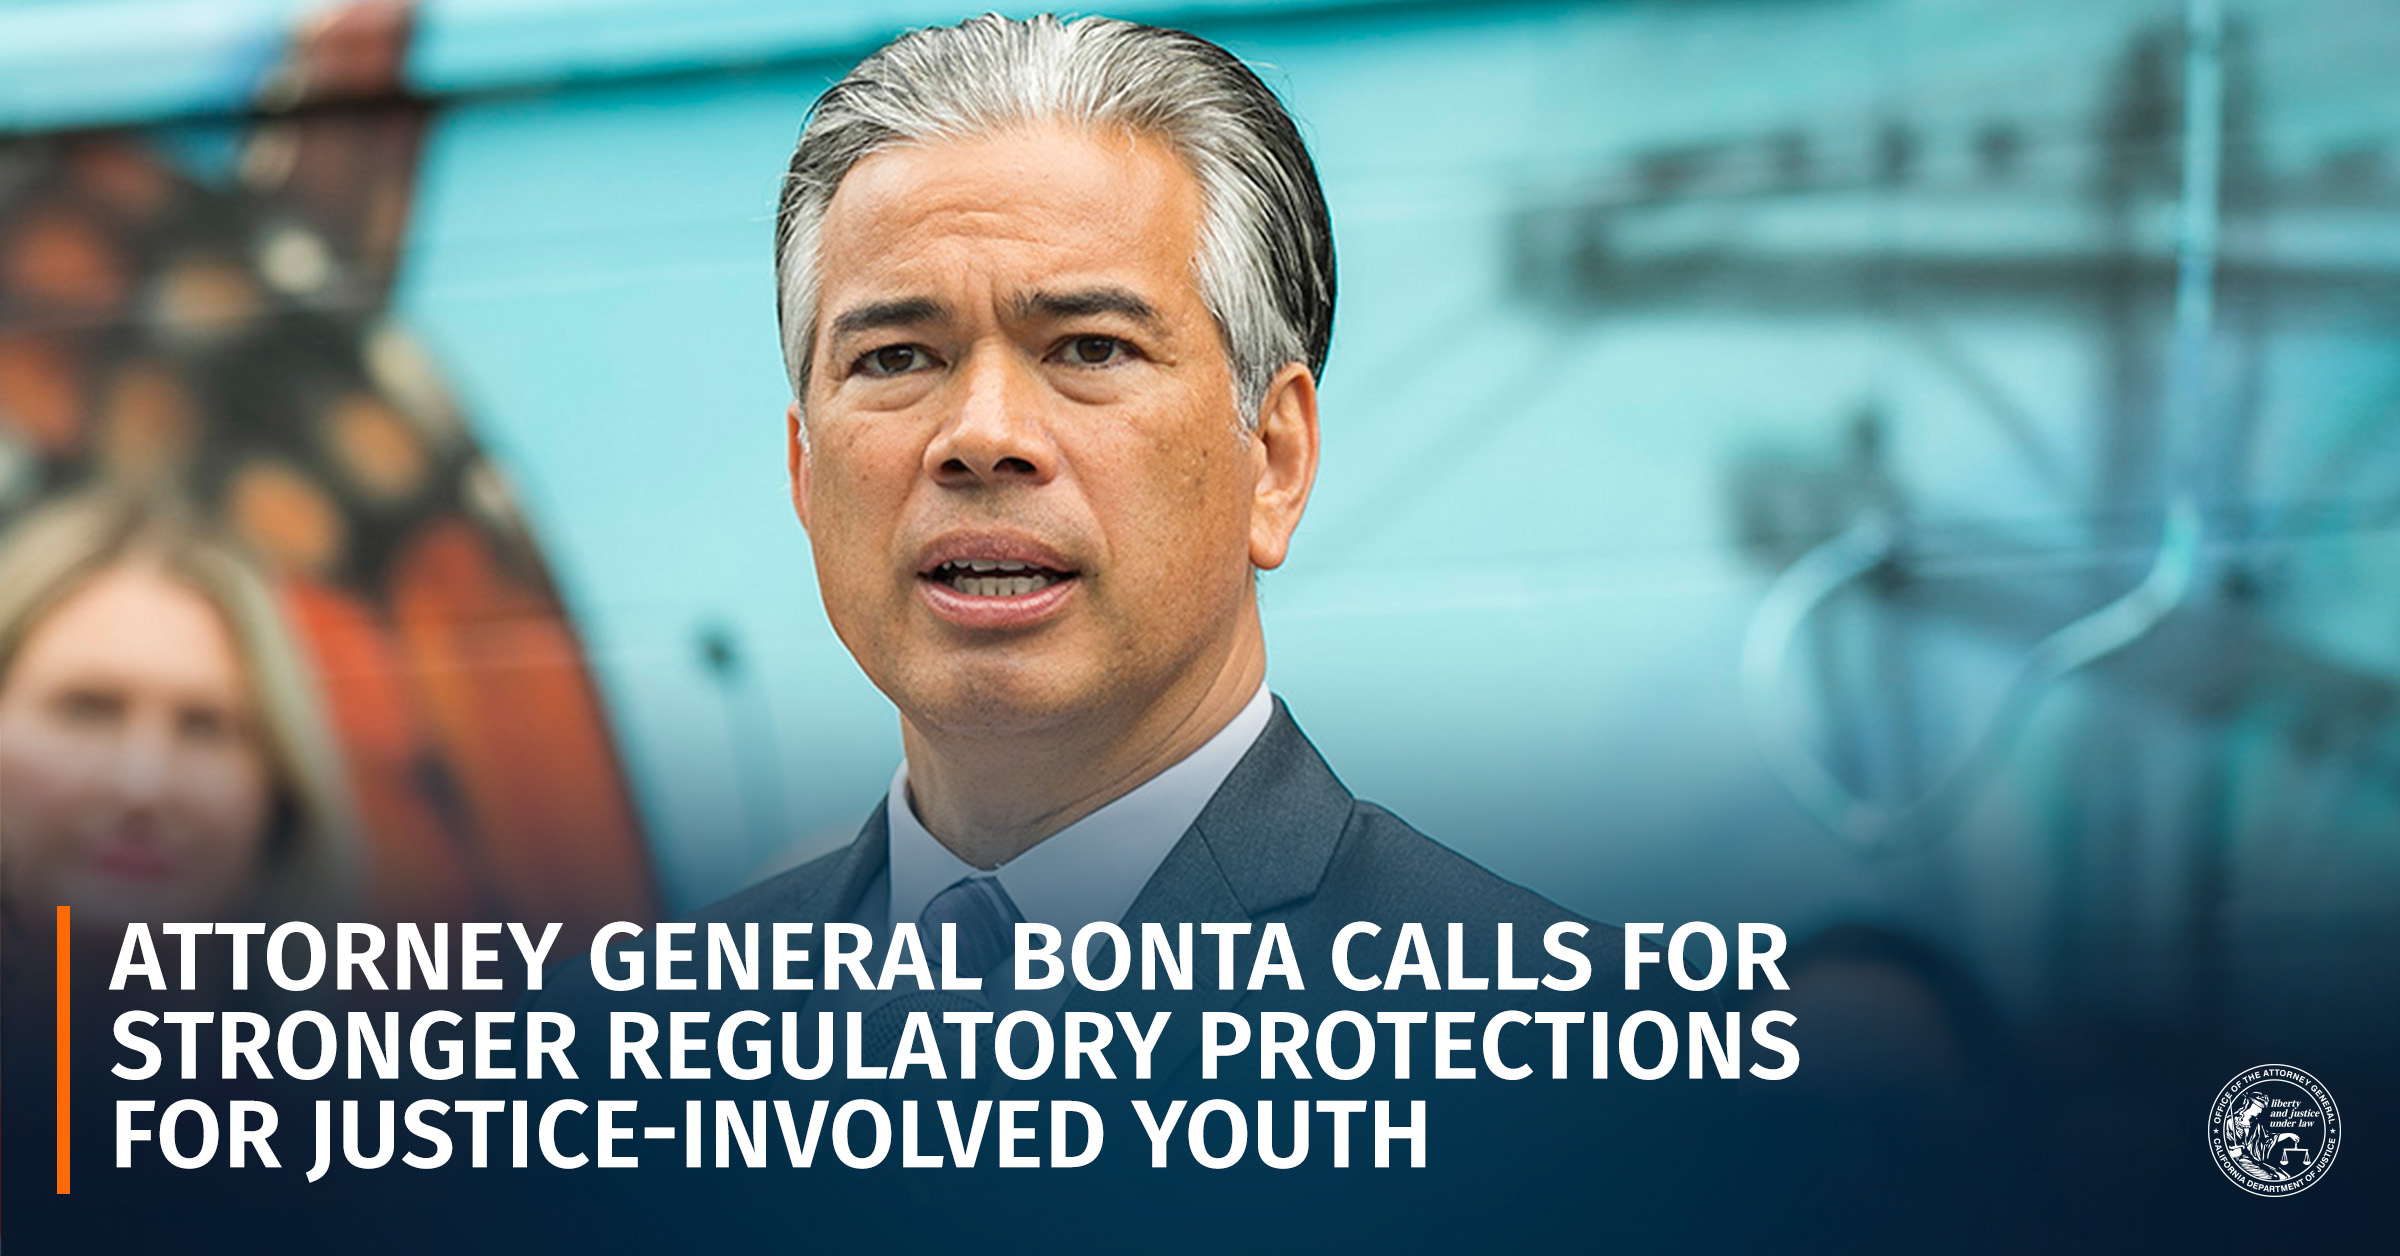 Attorney General Bonta Calls for Stronger Regulatory Protections for Justice-Involved Youth | State of California - Department of Justice - Office of the Attorney General